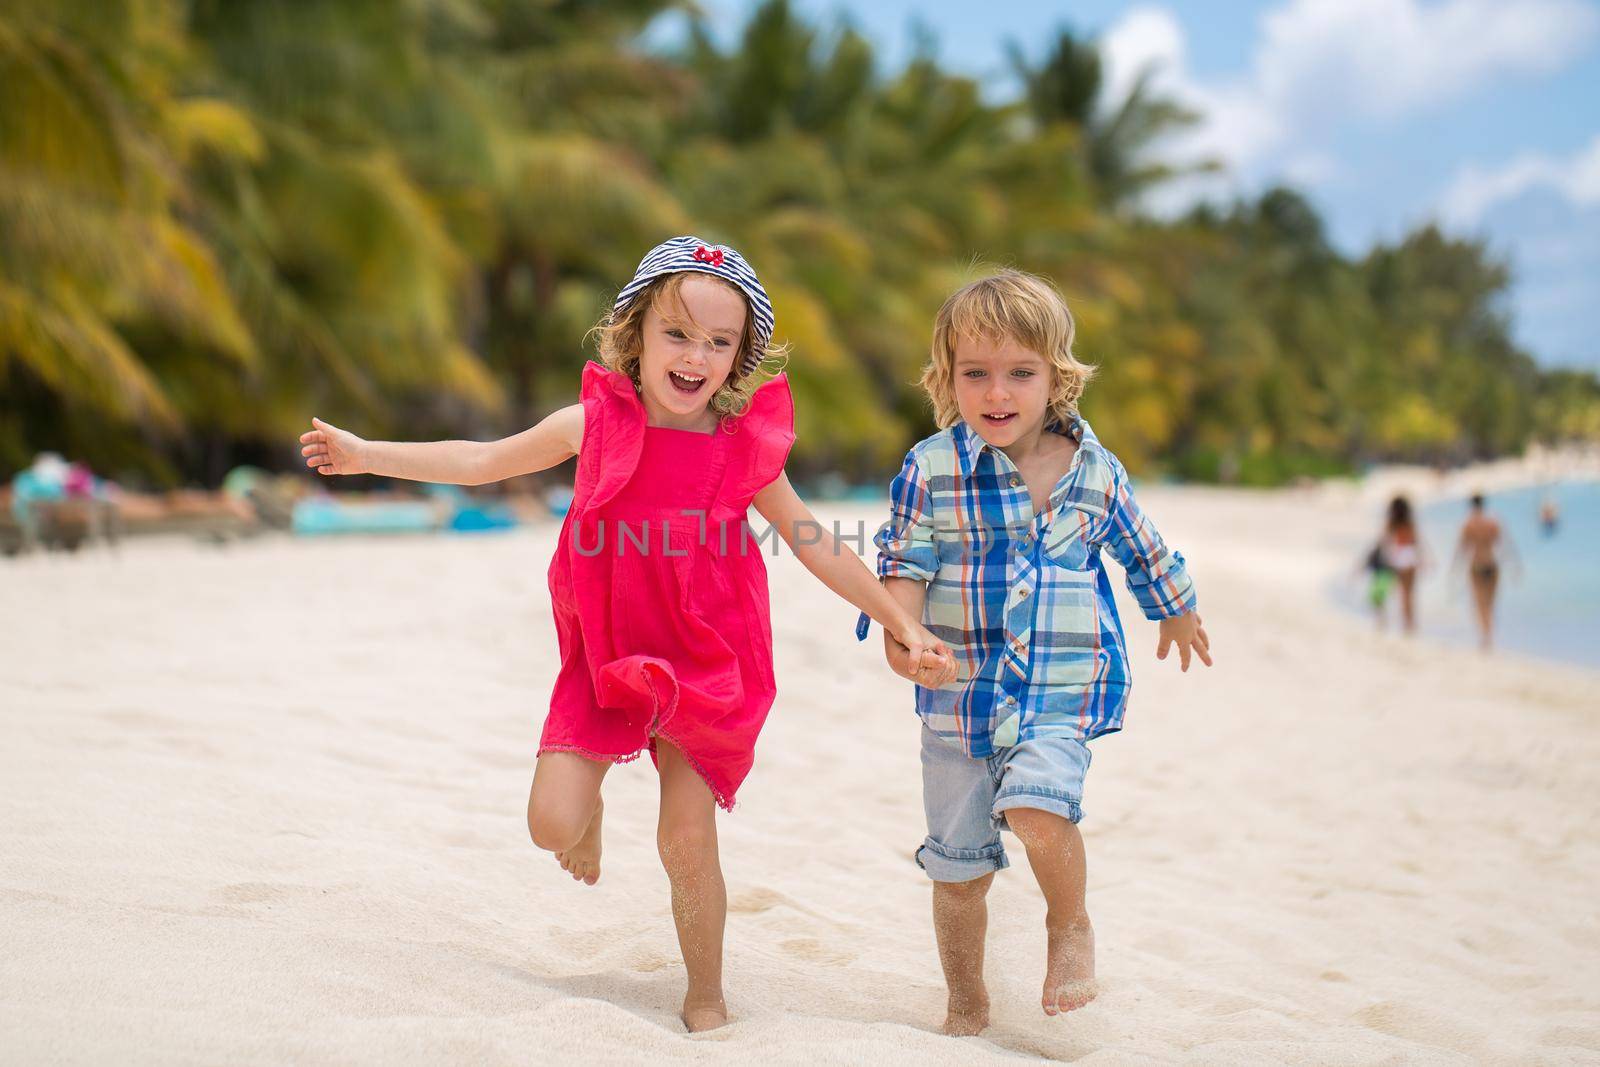 kids having fun running together in the beach